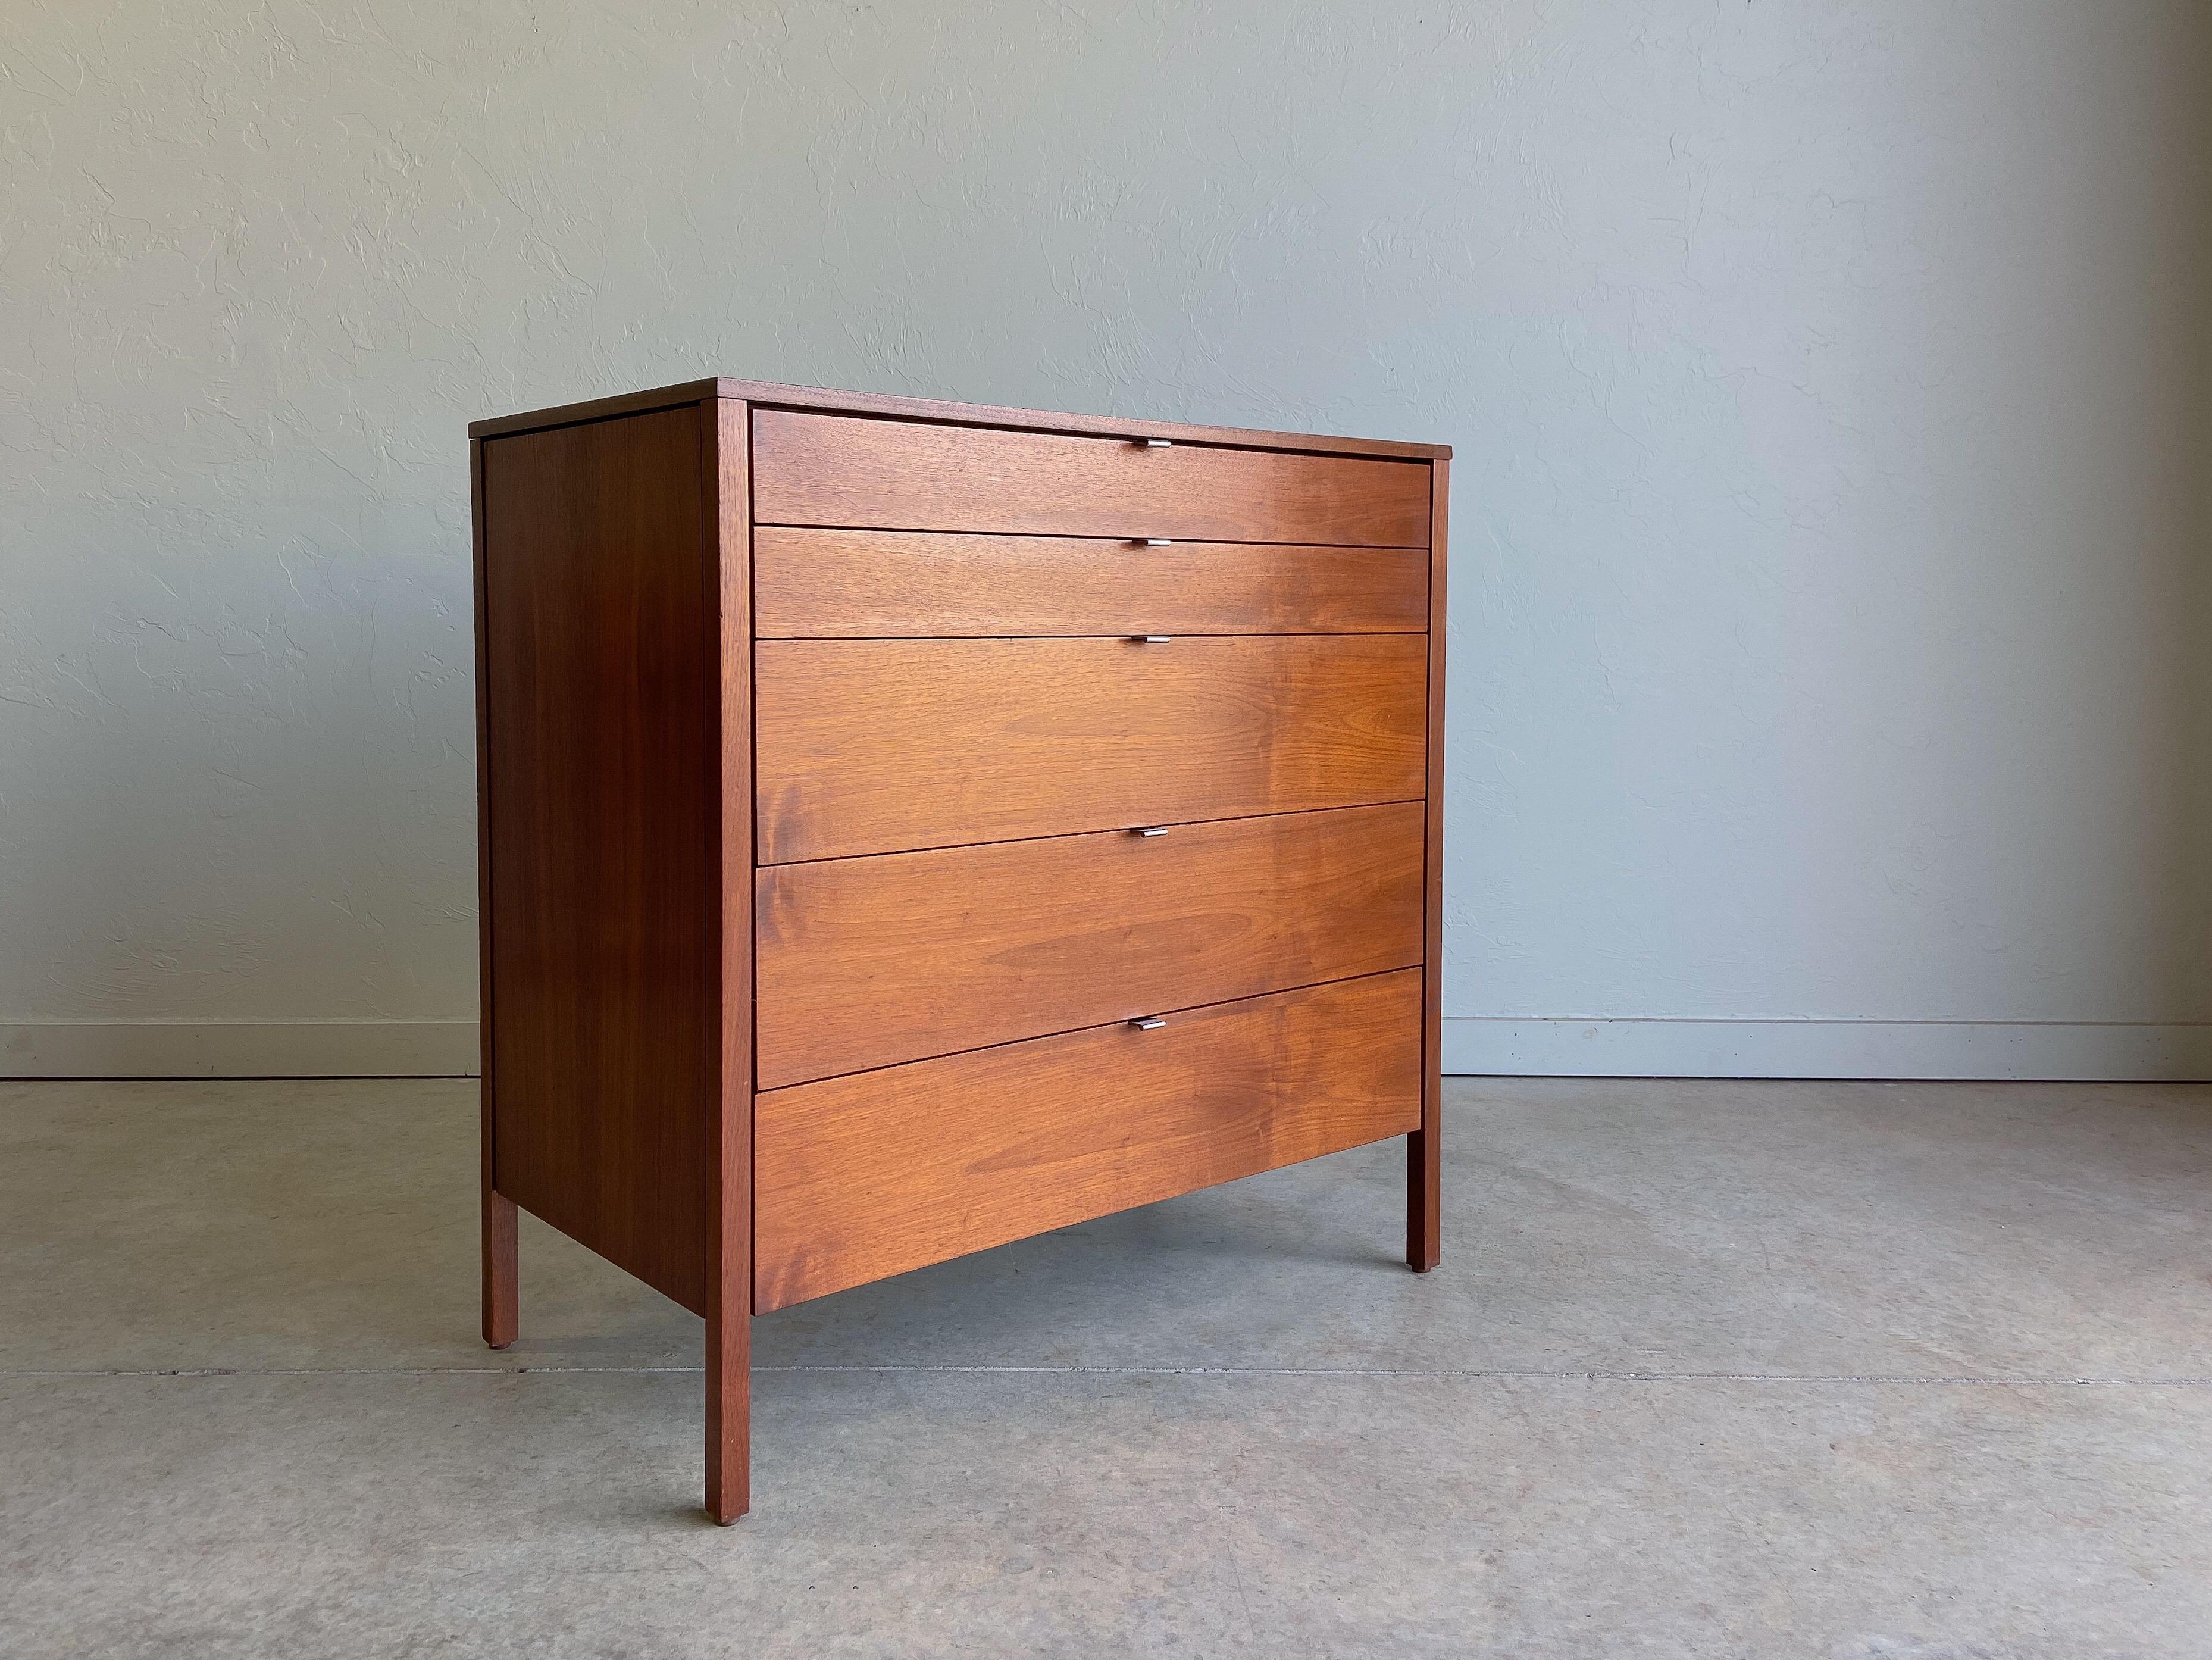 Offered is an early dresser or chest of drawers designed by Florence Knoll for Knoll International.

Beautiful walnut grain throughout. Retains the original chrome drawer pulls. Five drawers provide ample storage in a compact design.

